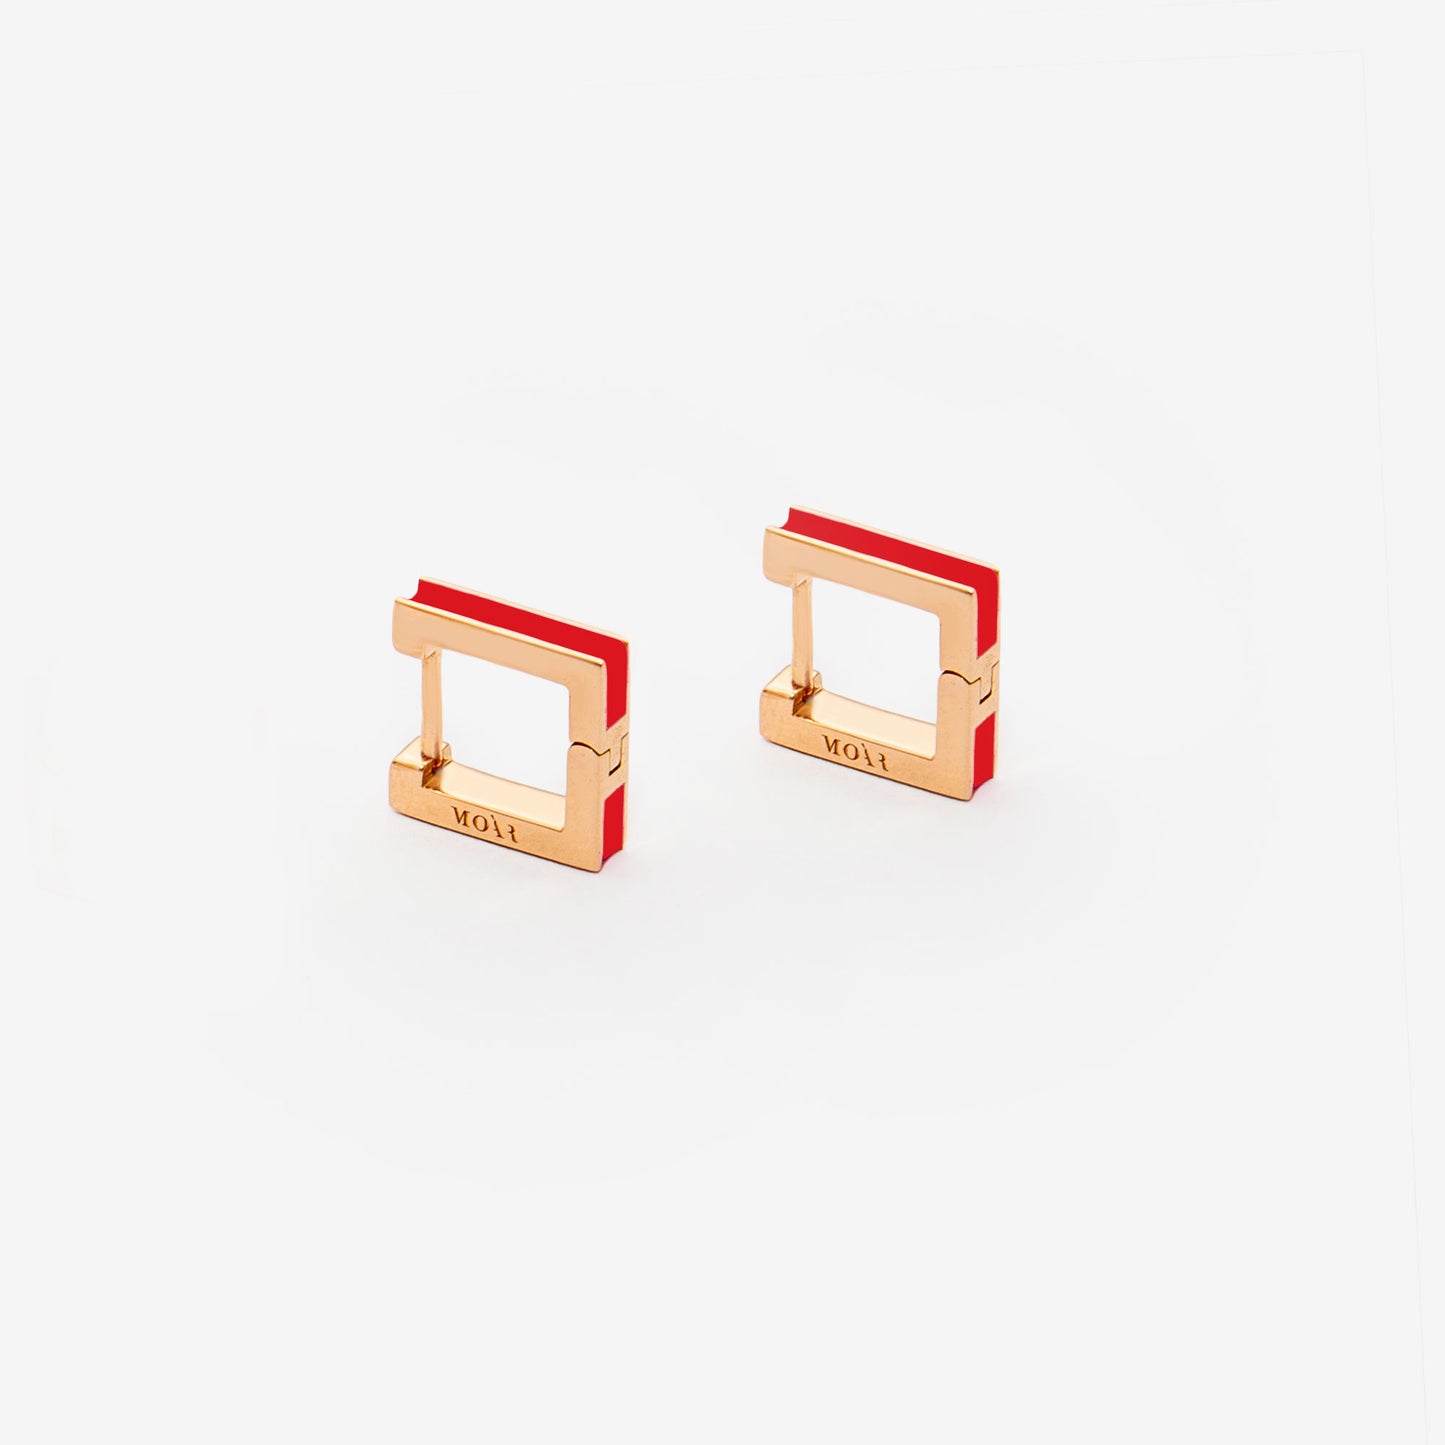 Square red  earrings